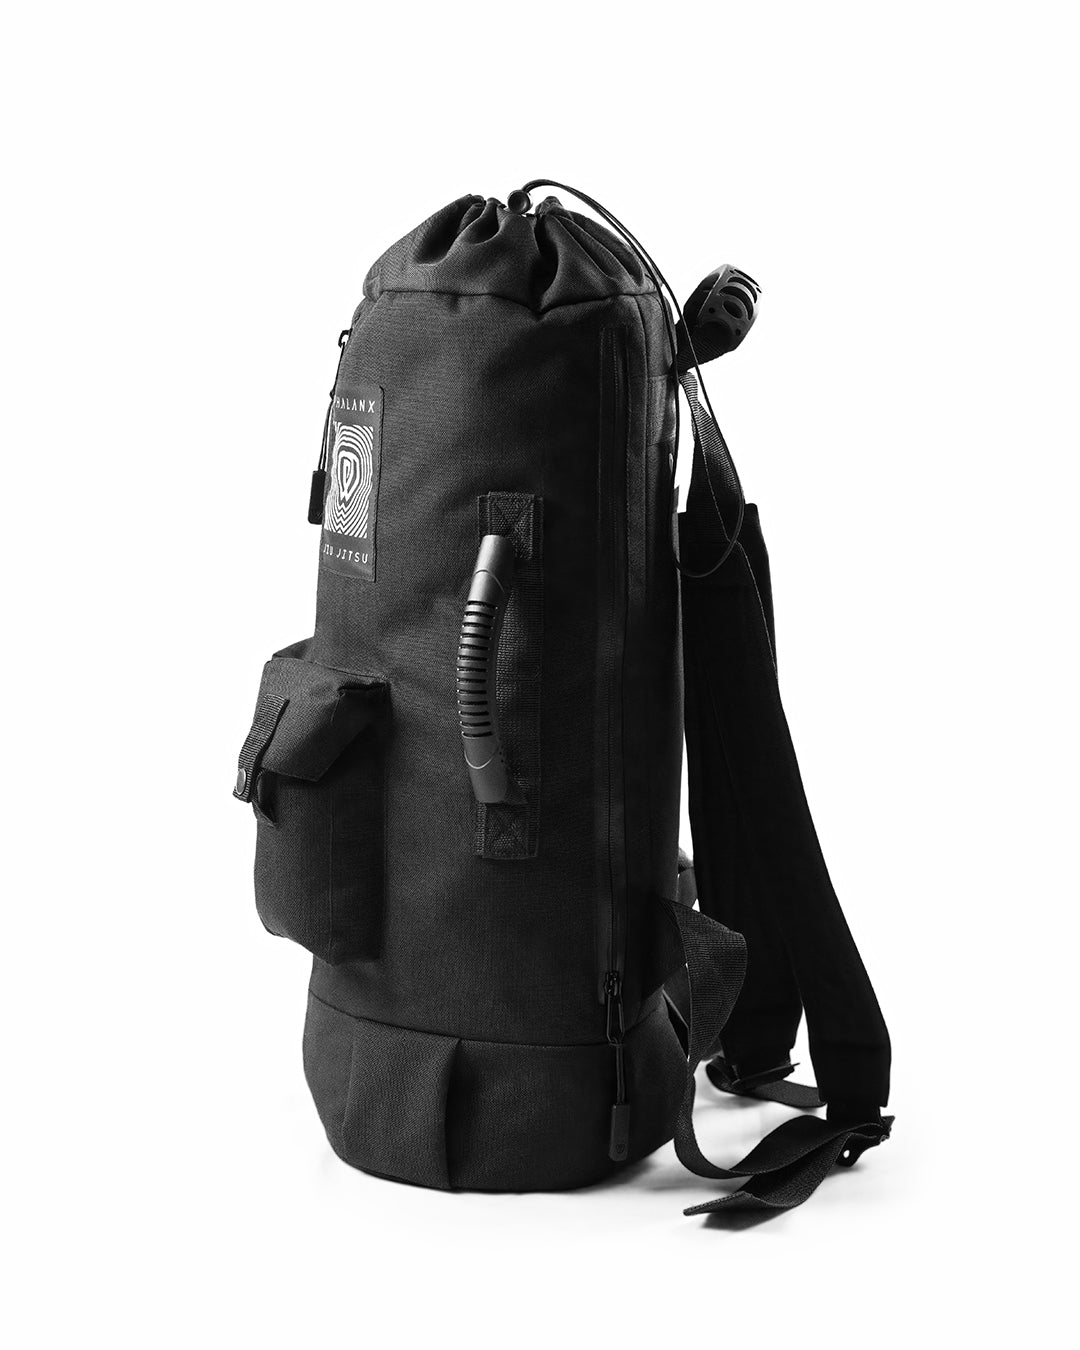 GEAR BAGS – Phalanx Formations